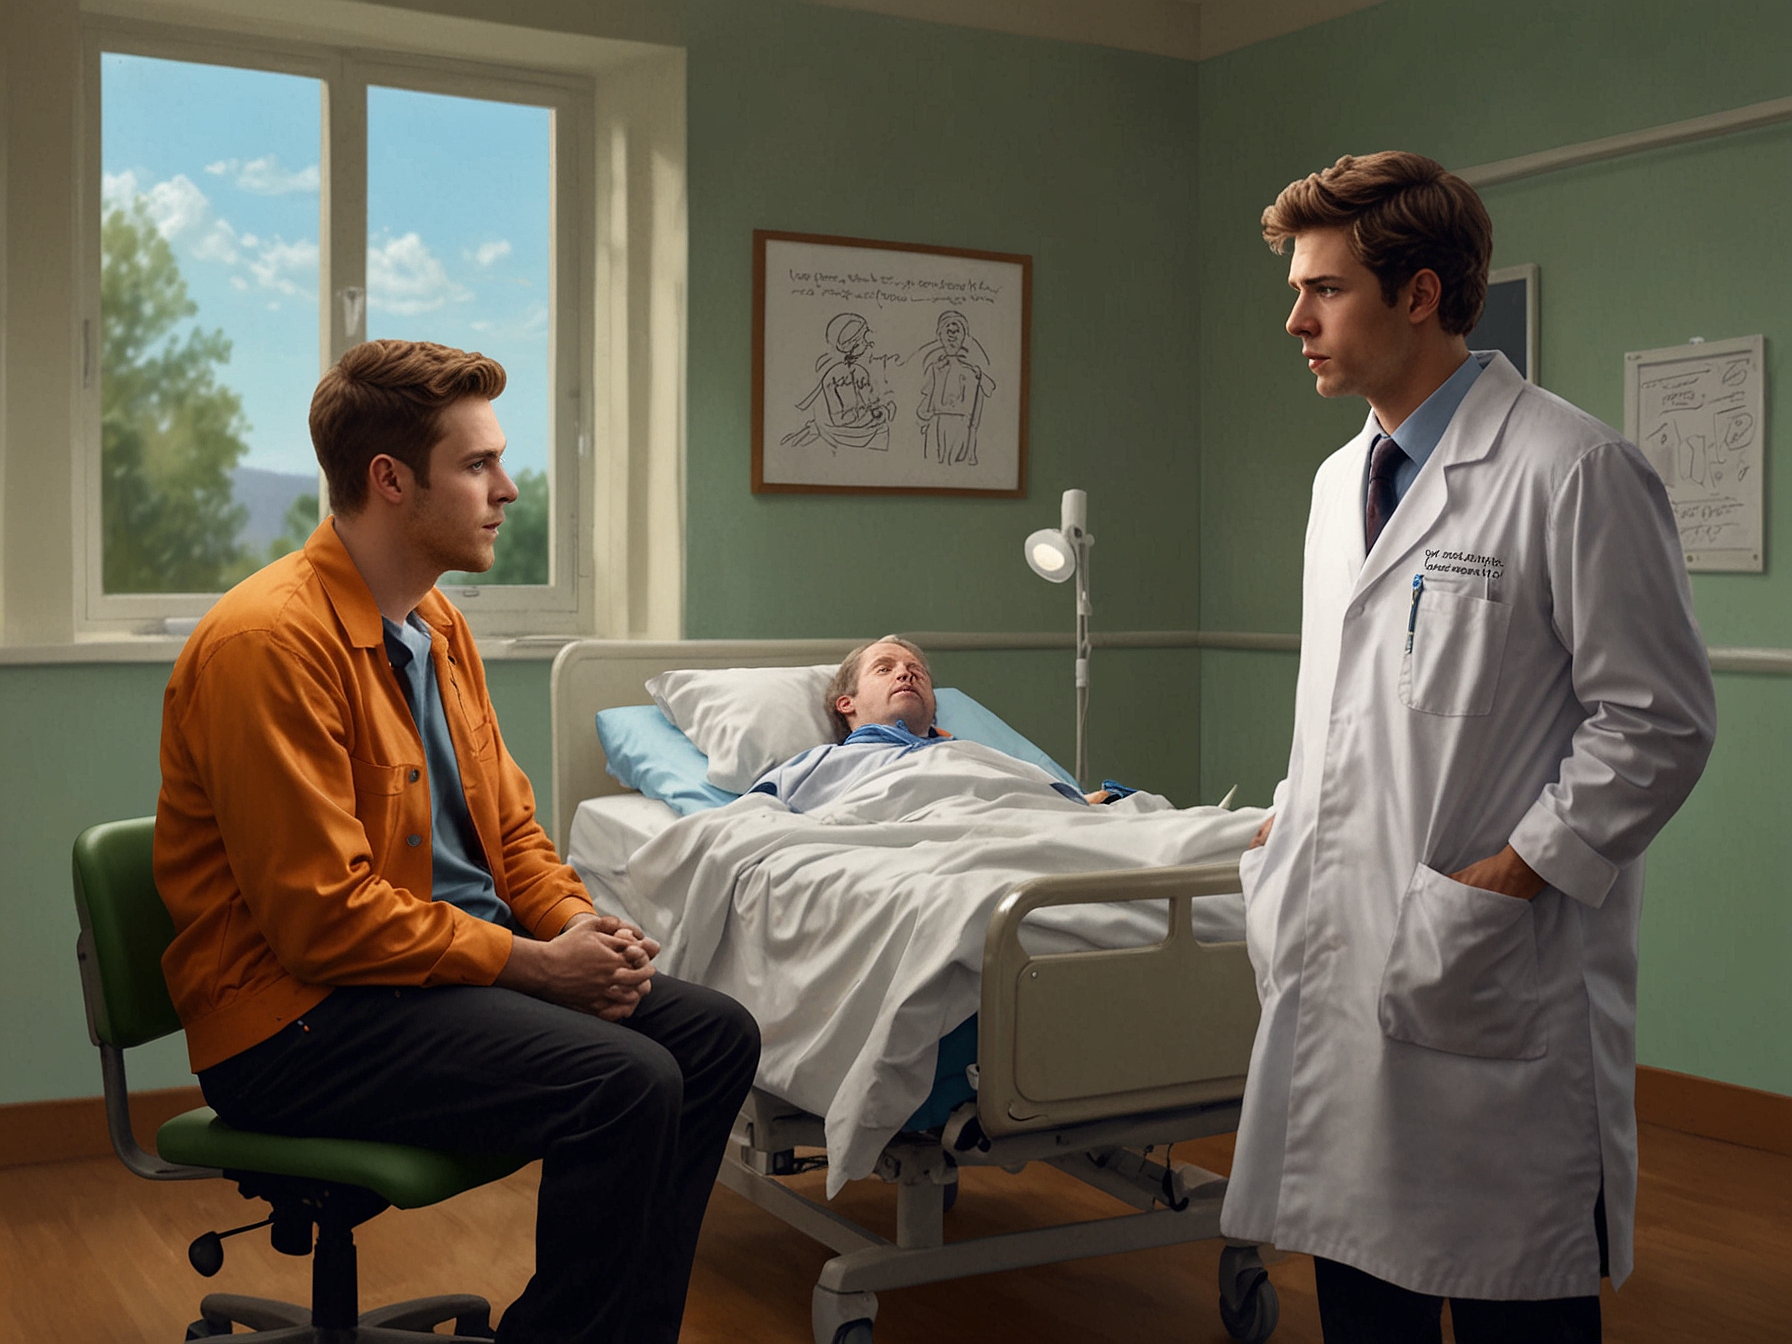 Dylan Keogh and the no-nonsense newcomer engage in a heated discussion over a patient's treatment plan in the hospital, showcasing their strong-willed personalities.